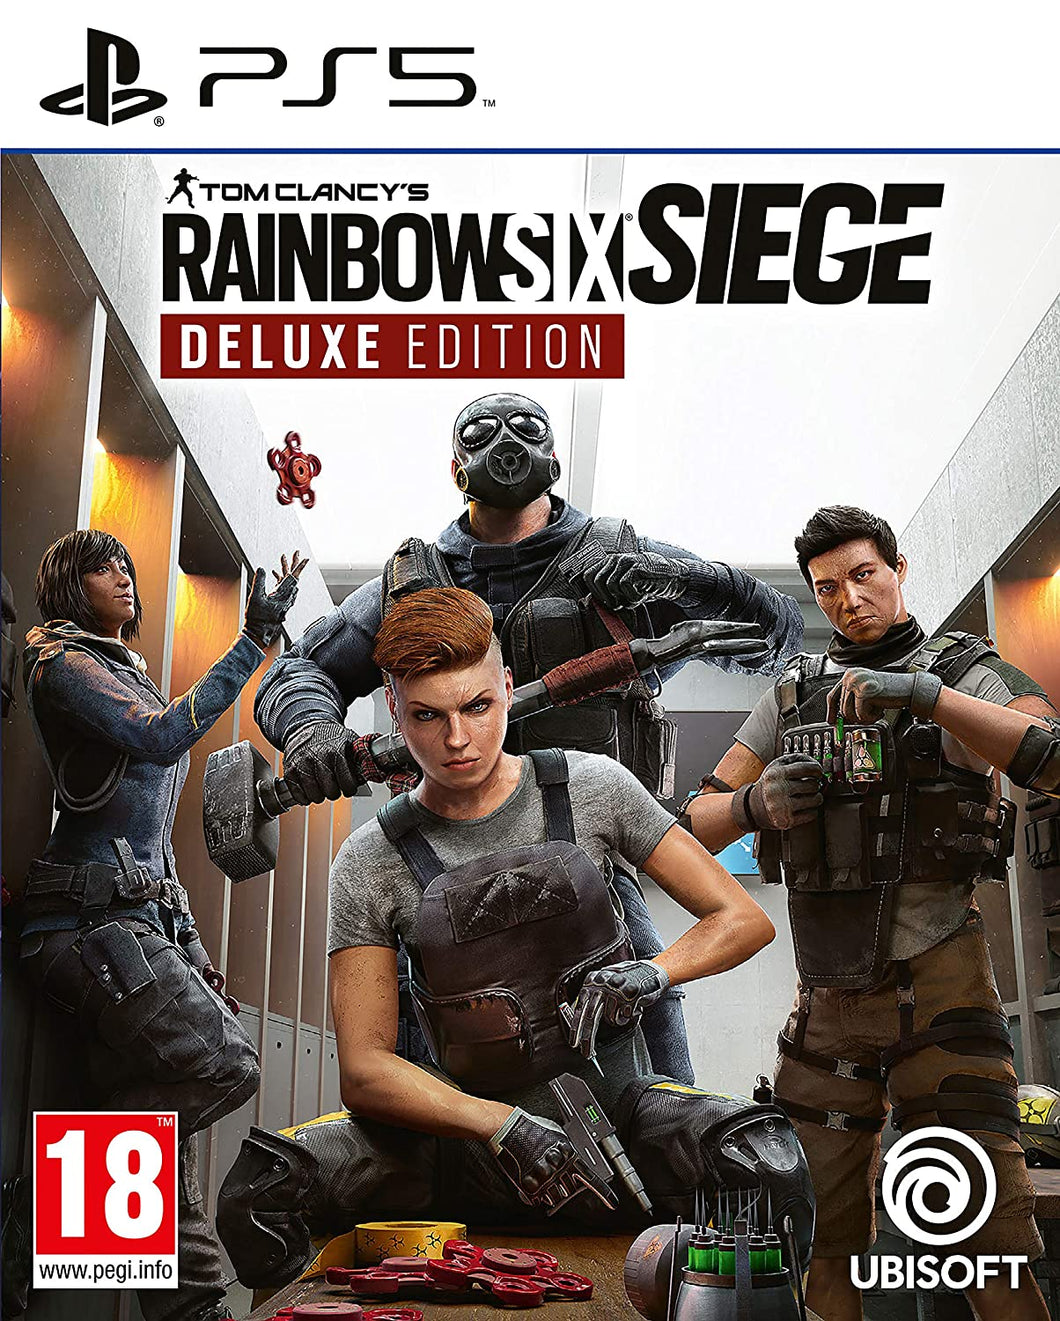 Tom Clancy's Rainbow Six Siege Deluxe Edition- PlayStation 5